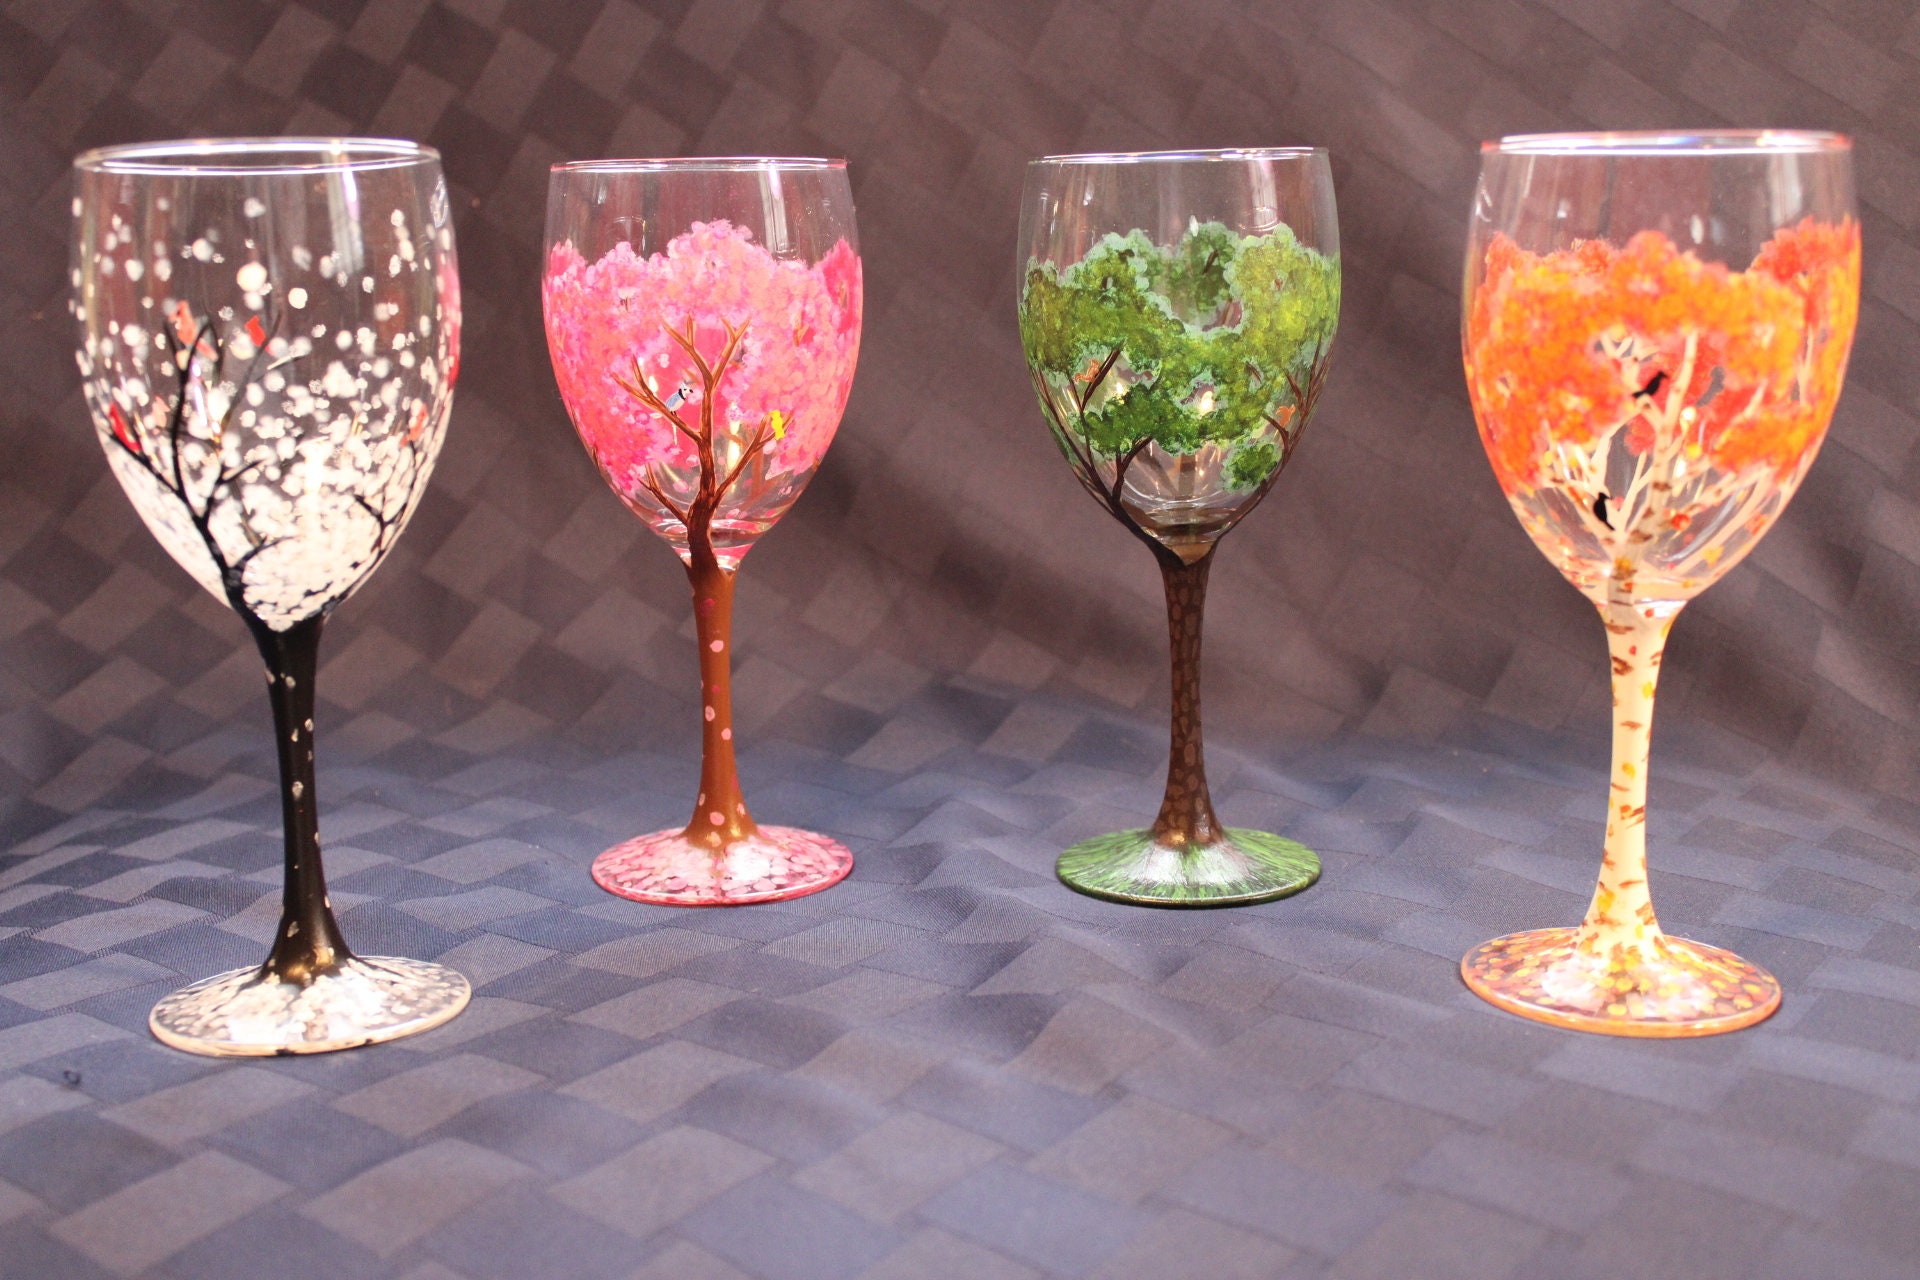 How to Paint Wine Glasses: DIY Valentine's Day Wine Glasses